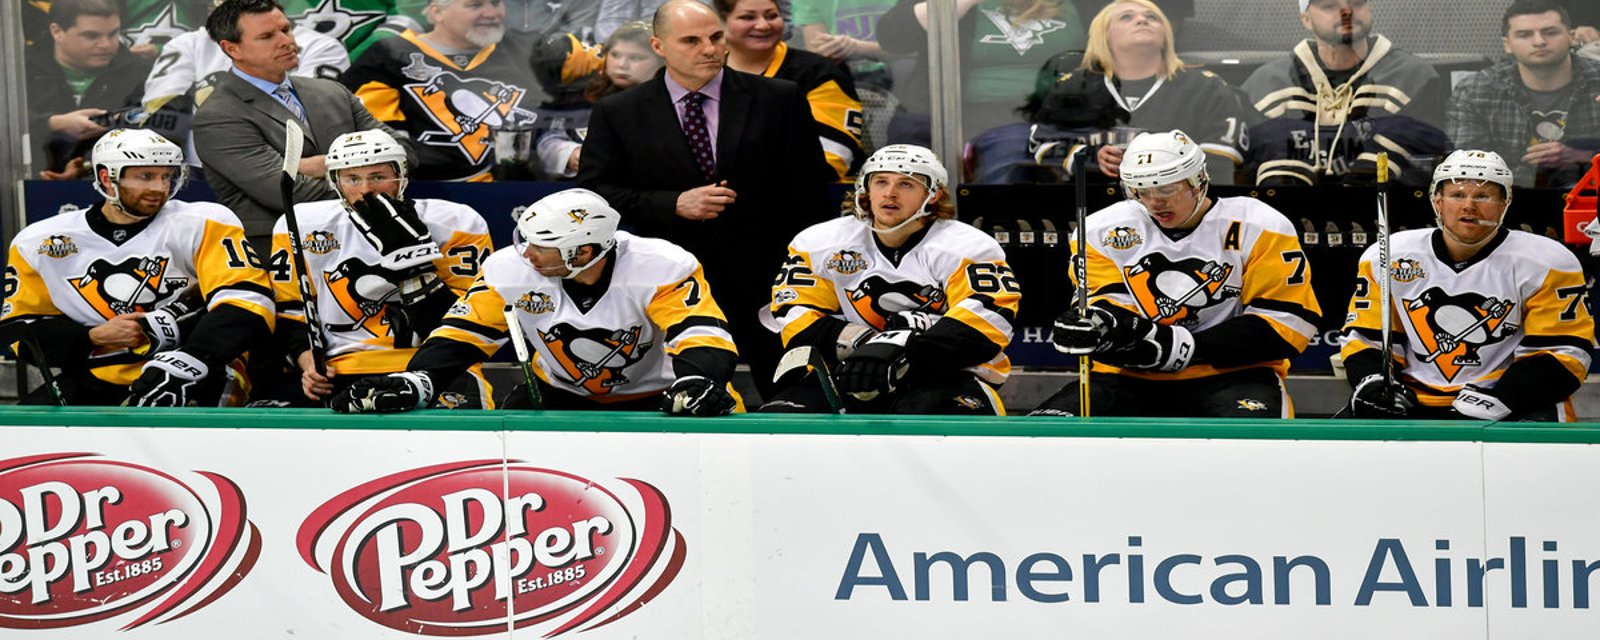 Pittsburgh trolled 2 NHL teams on Twitter so hard yesterday! 